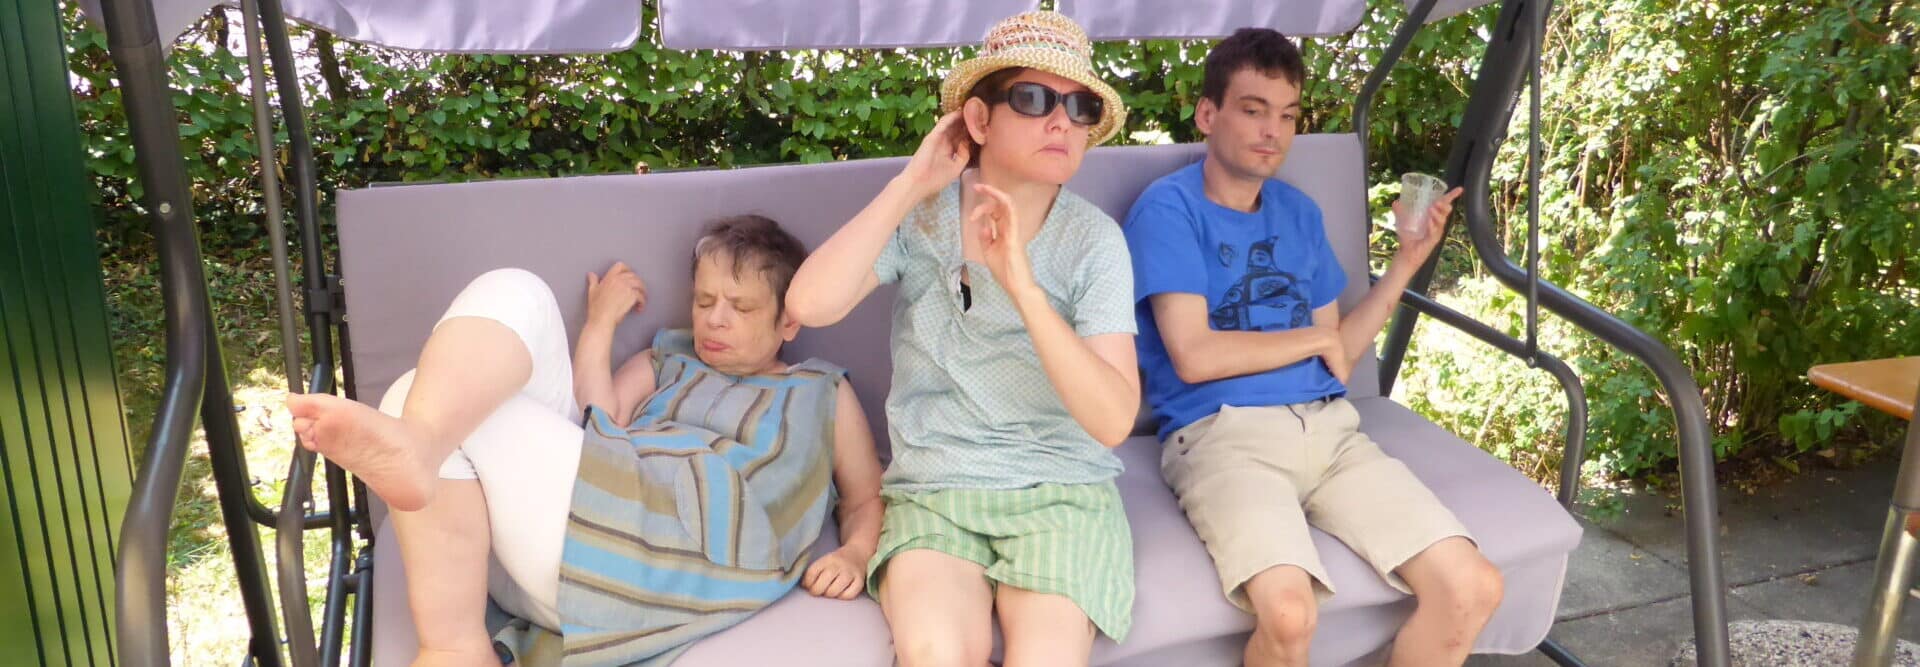 2 female clients and 1 male client on the Hollywood swing at the garden party. They are wearing summer clothes. The client on the left seems to be dozing in a semi-reclining position. The client on the right is chilling with a drink in his hand. The client in the middle takes a classic diva pose with sun hat and sunglasses.